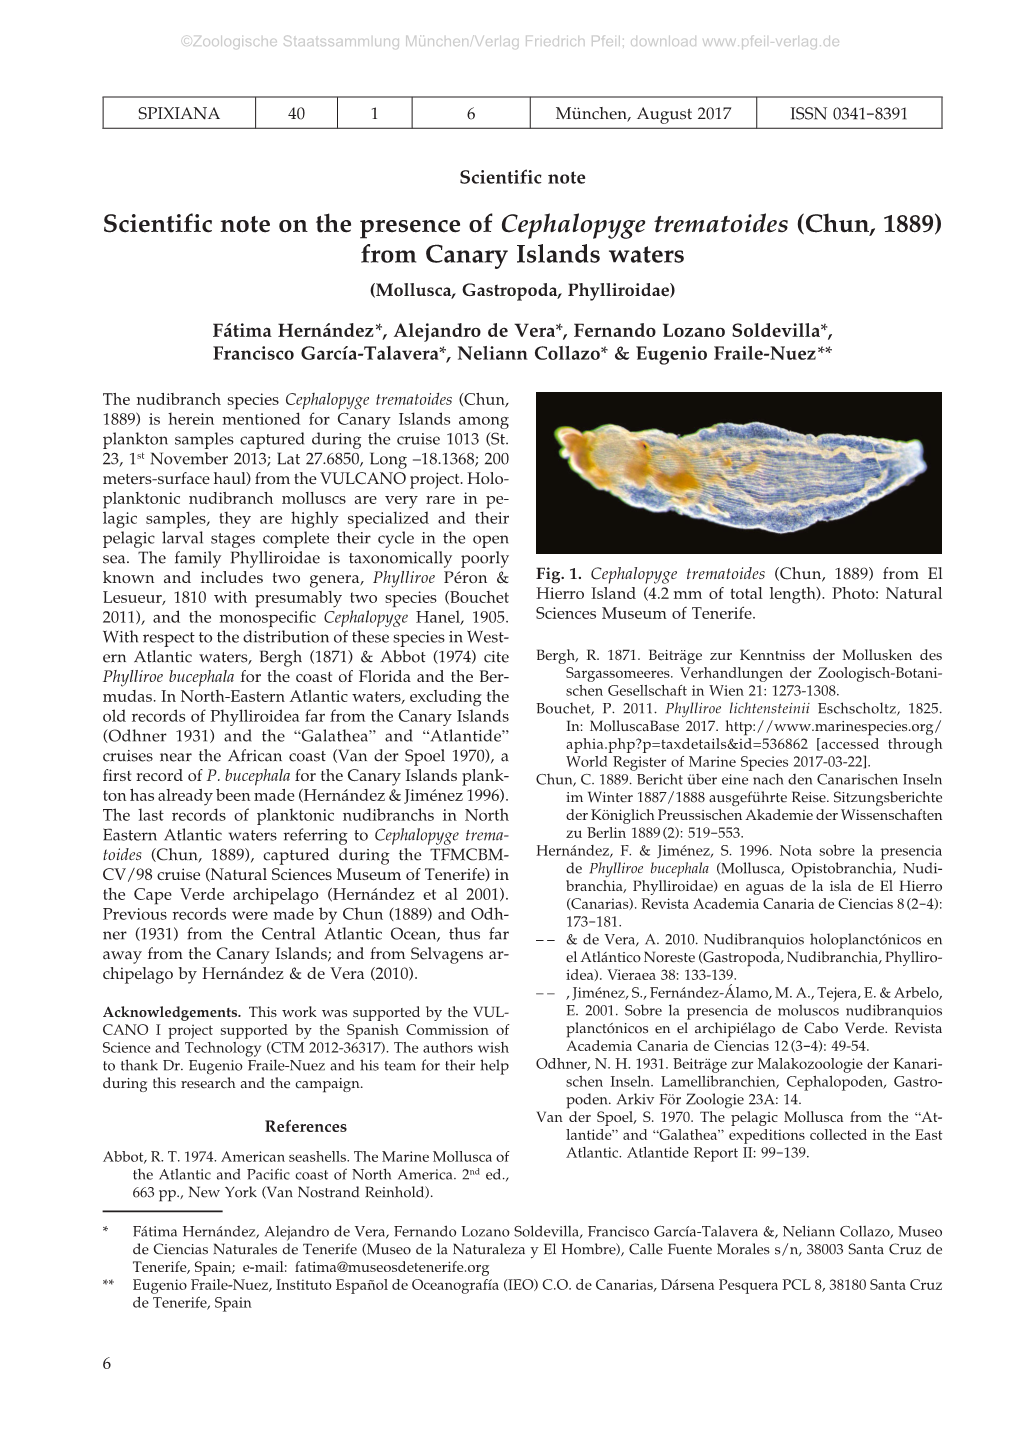 Scientific Note on the Presence of Cephalopyge Trematoides (Chun, 1889) from Canary Islands Waters (Mollusca, Gastropoda, Phylliroidae)